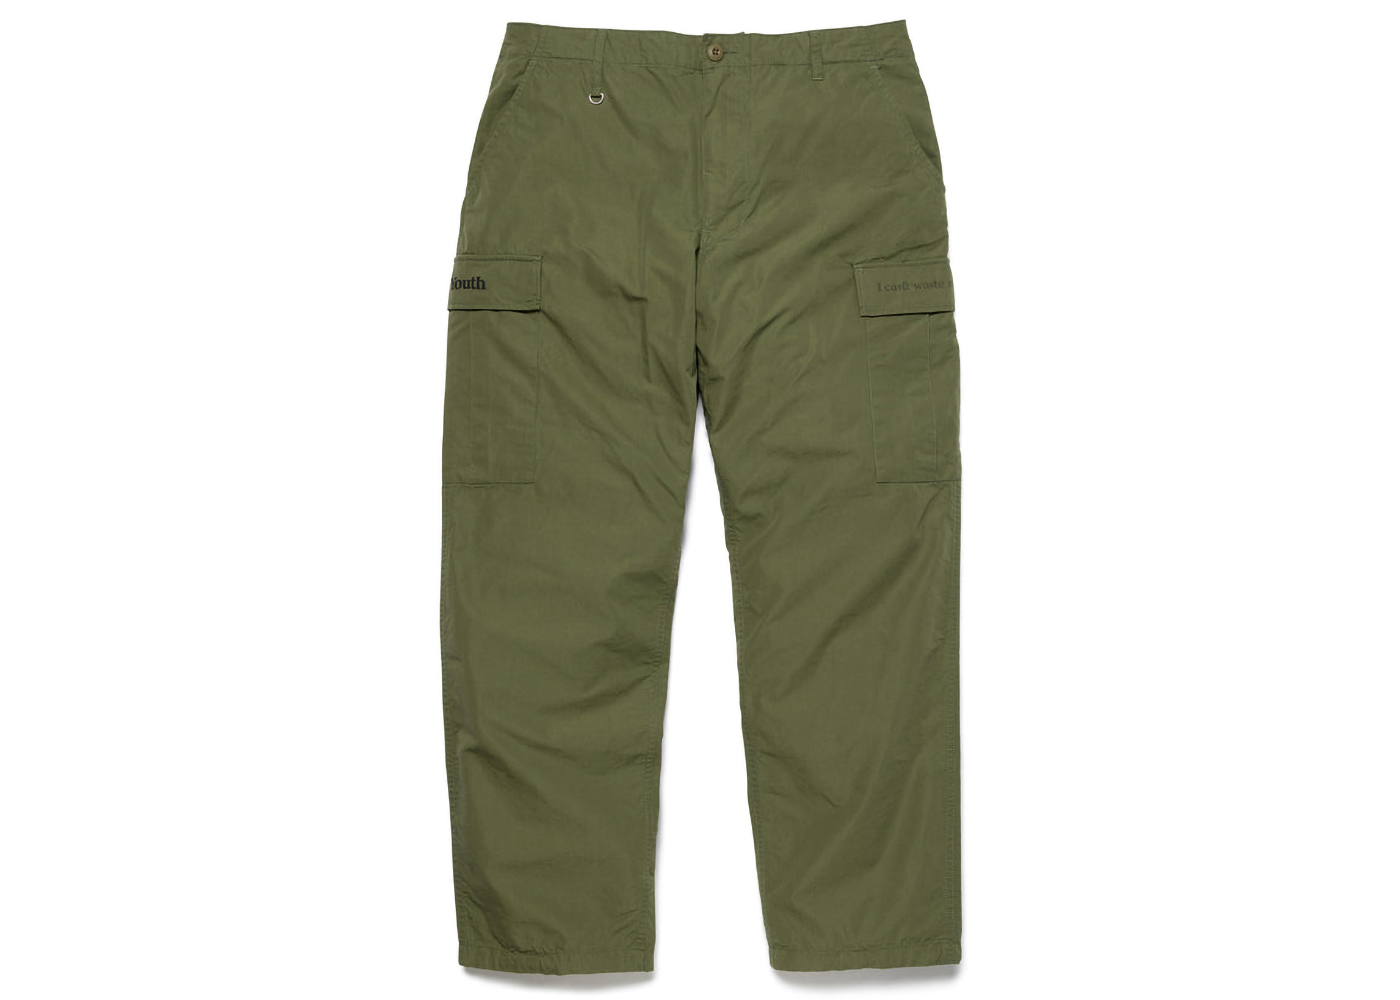 Wasted Youth CARGO PANTS OLIVE DRAB XL